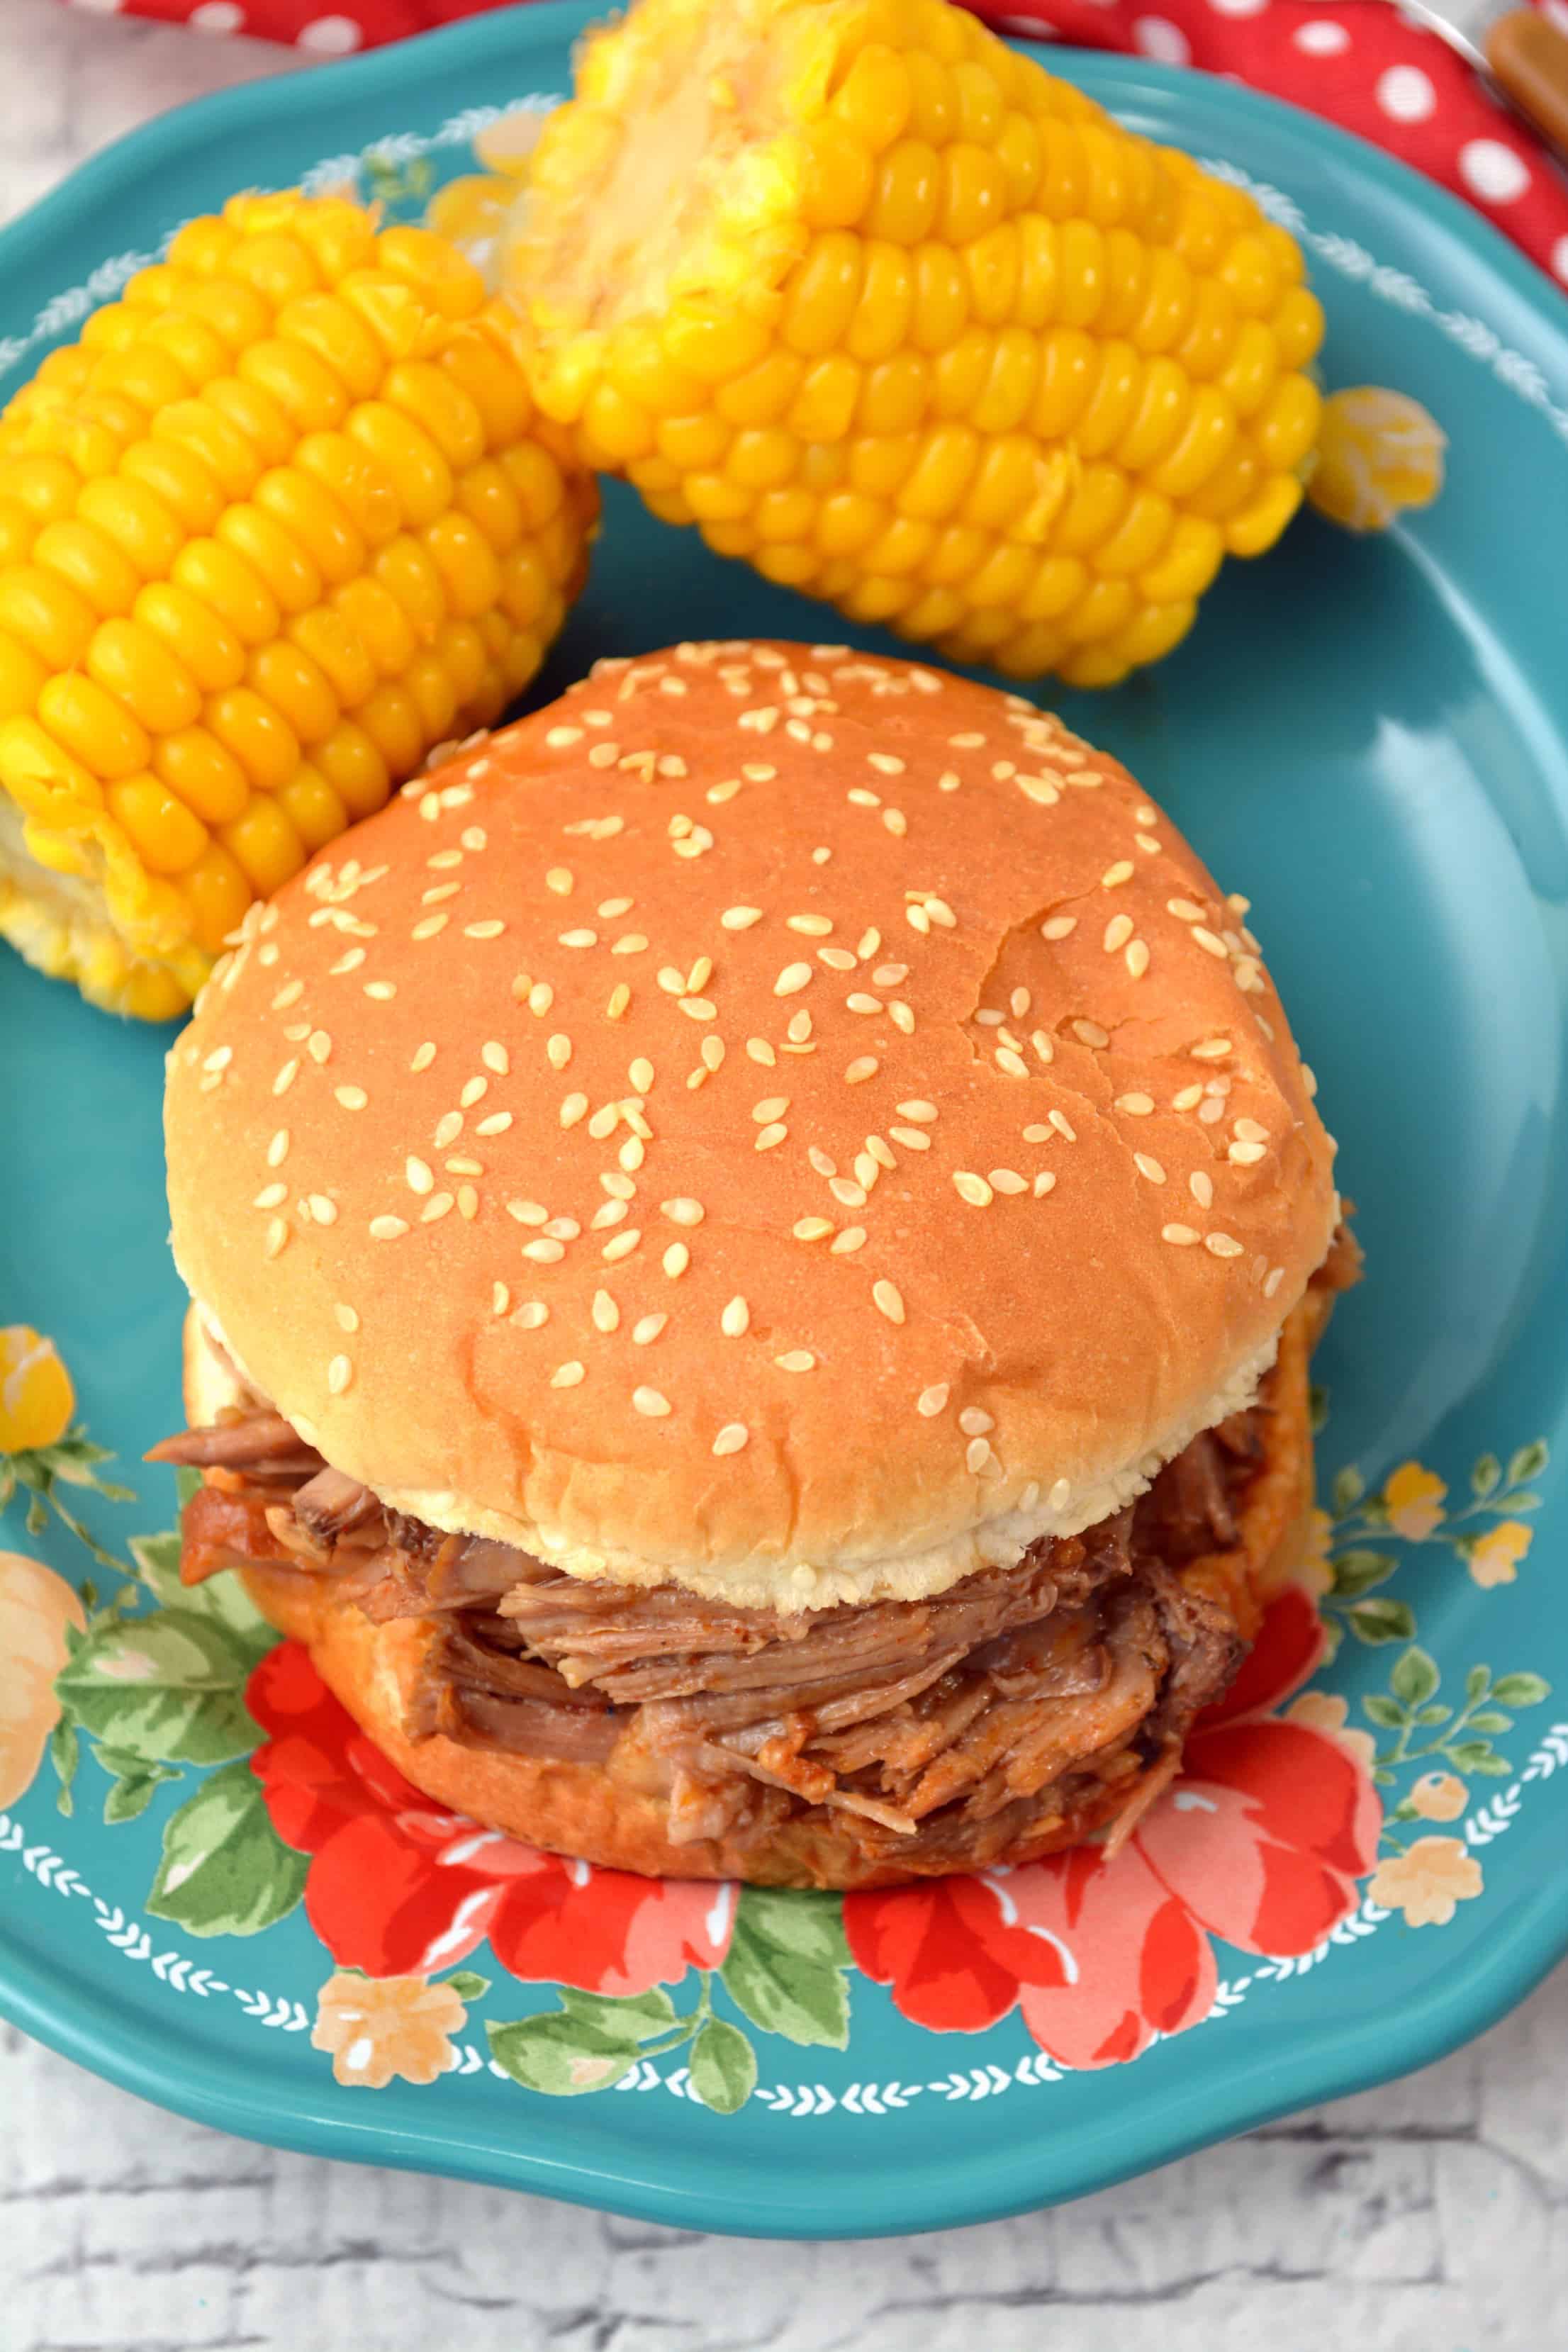 BBQ Pulled Slow Cooked Pork-Sandwiches